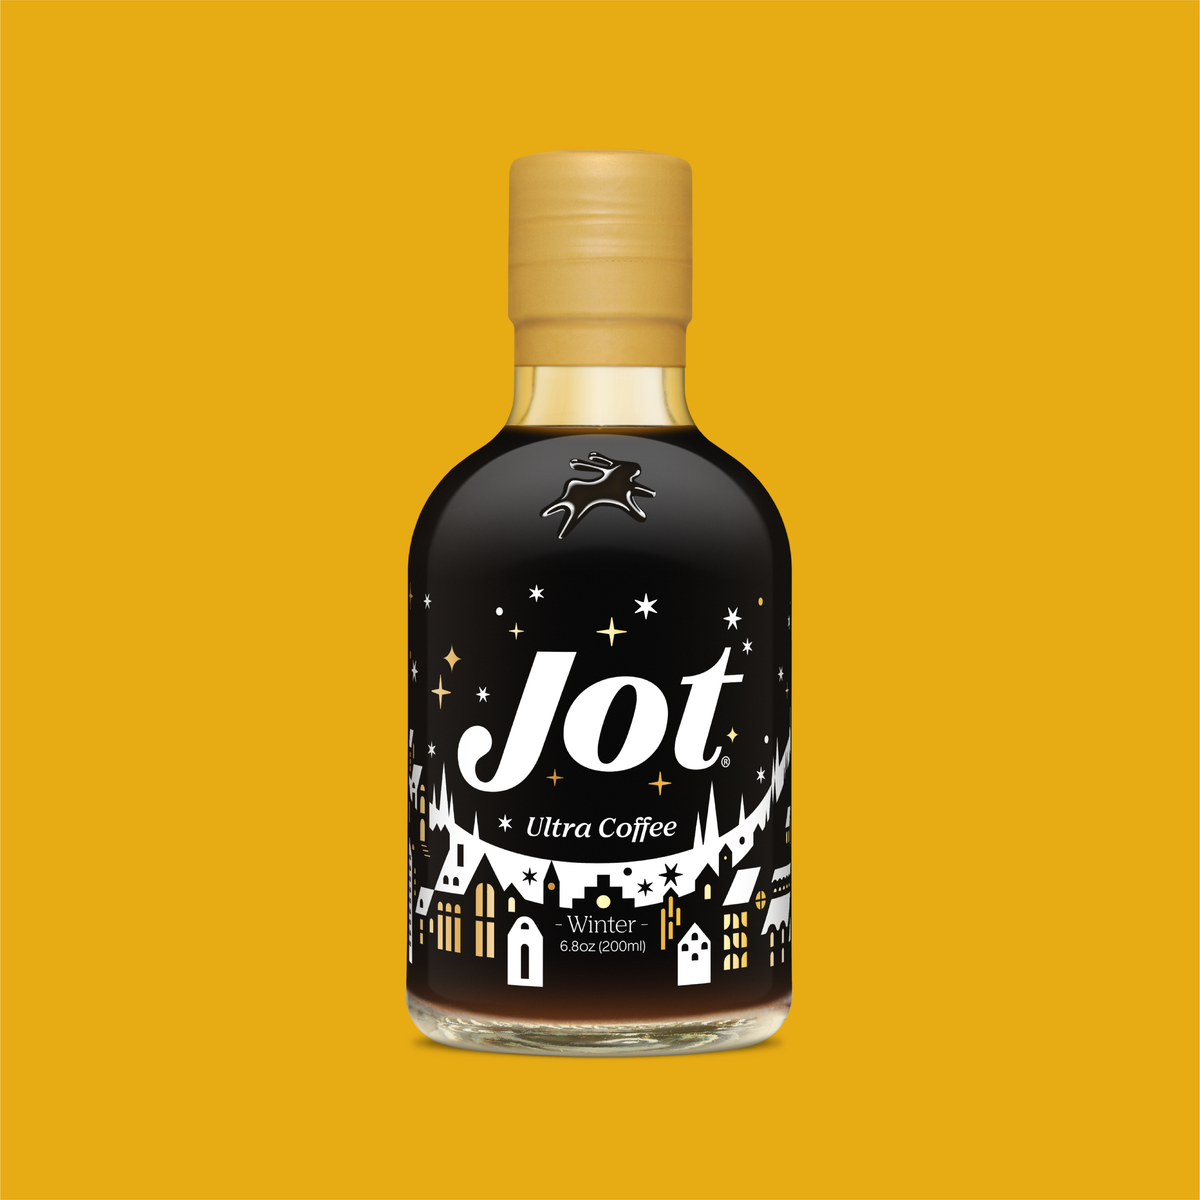 Jot Ultra Coffee Just Launched a Limited-Edition Bottle Called